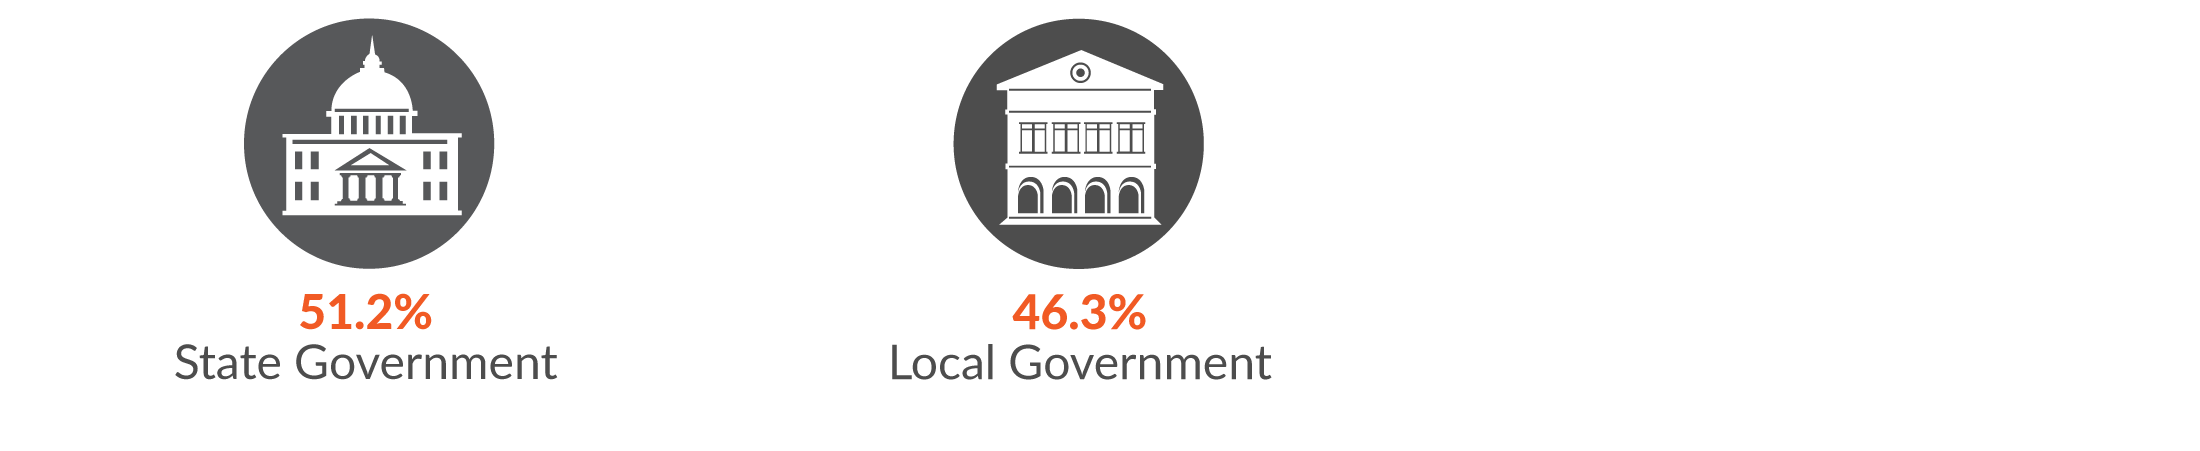 This infographic shows 51.2% of Government administration & defence serious injury claims were in State Government and 46.3% in Local Government.